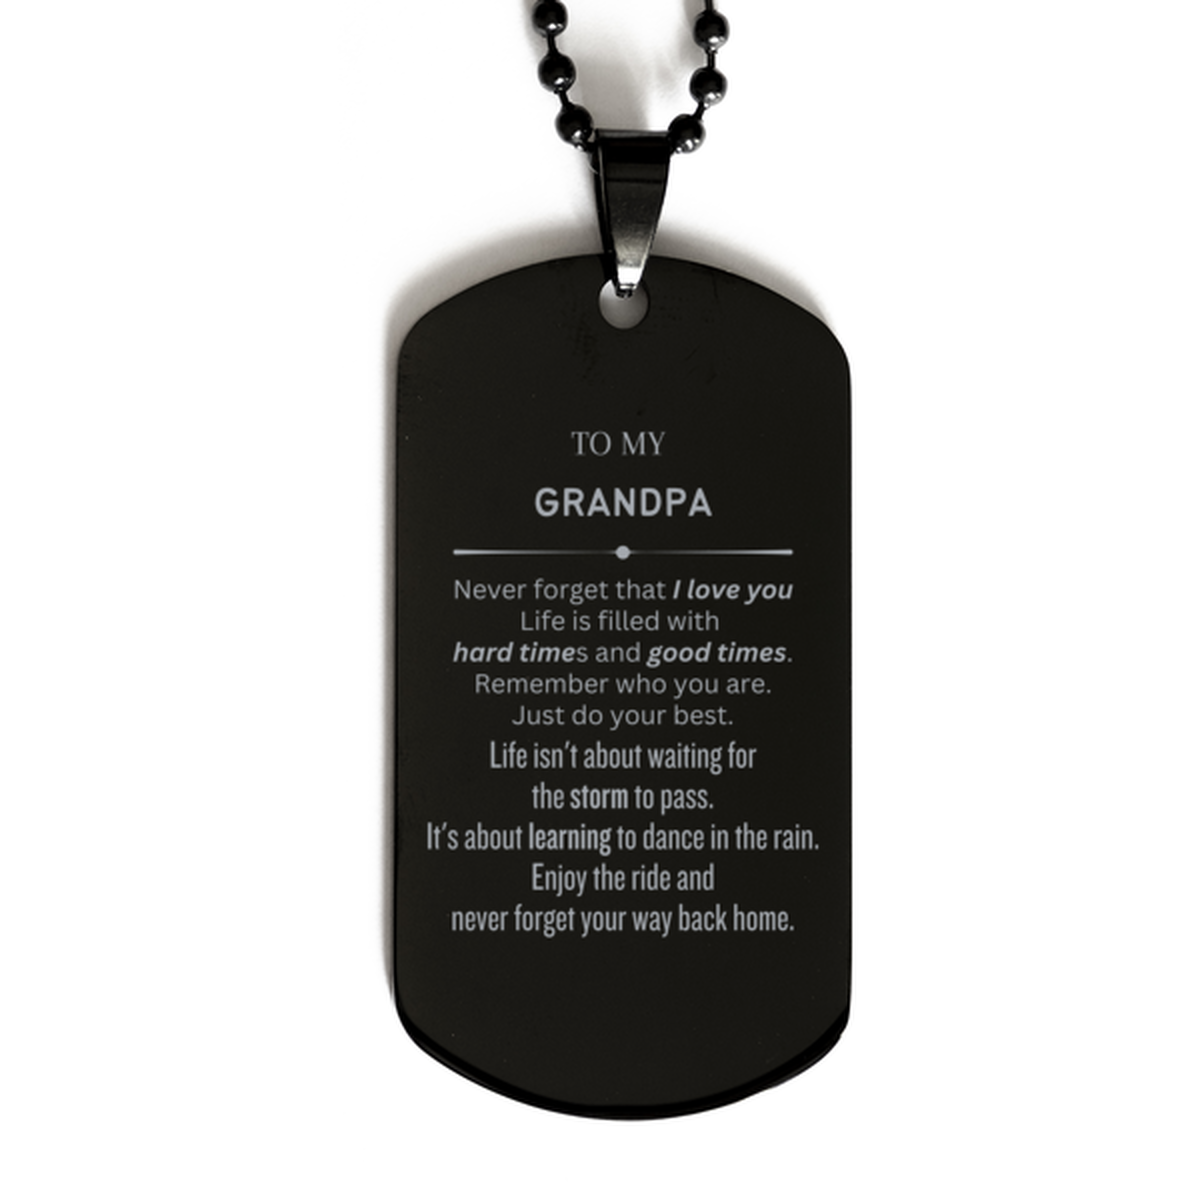 Christmas Grandpa Black Dog Tag Gifts, To My Grandpa Birthday Thank You Gifts For Grandpa, Graduation Unique Gifts For Grandpa To My Grandpa Never forget that I love you life is filled with hard times and good times. Remember who you are. Just do your bes